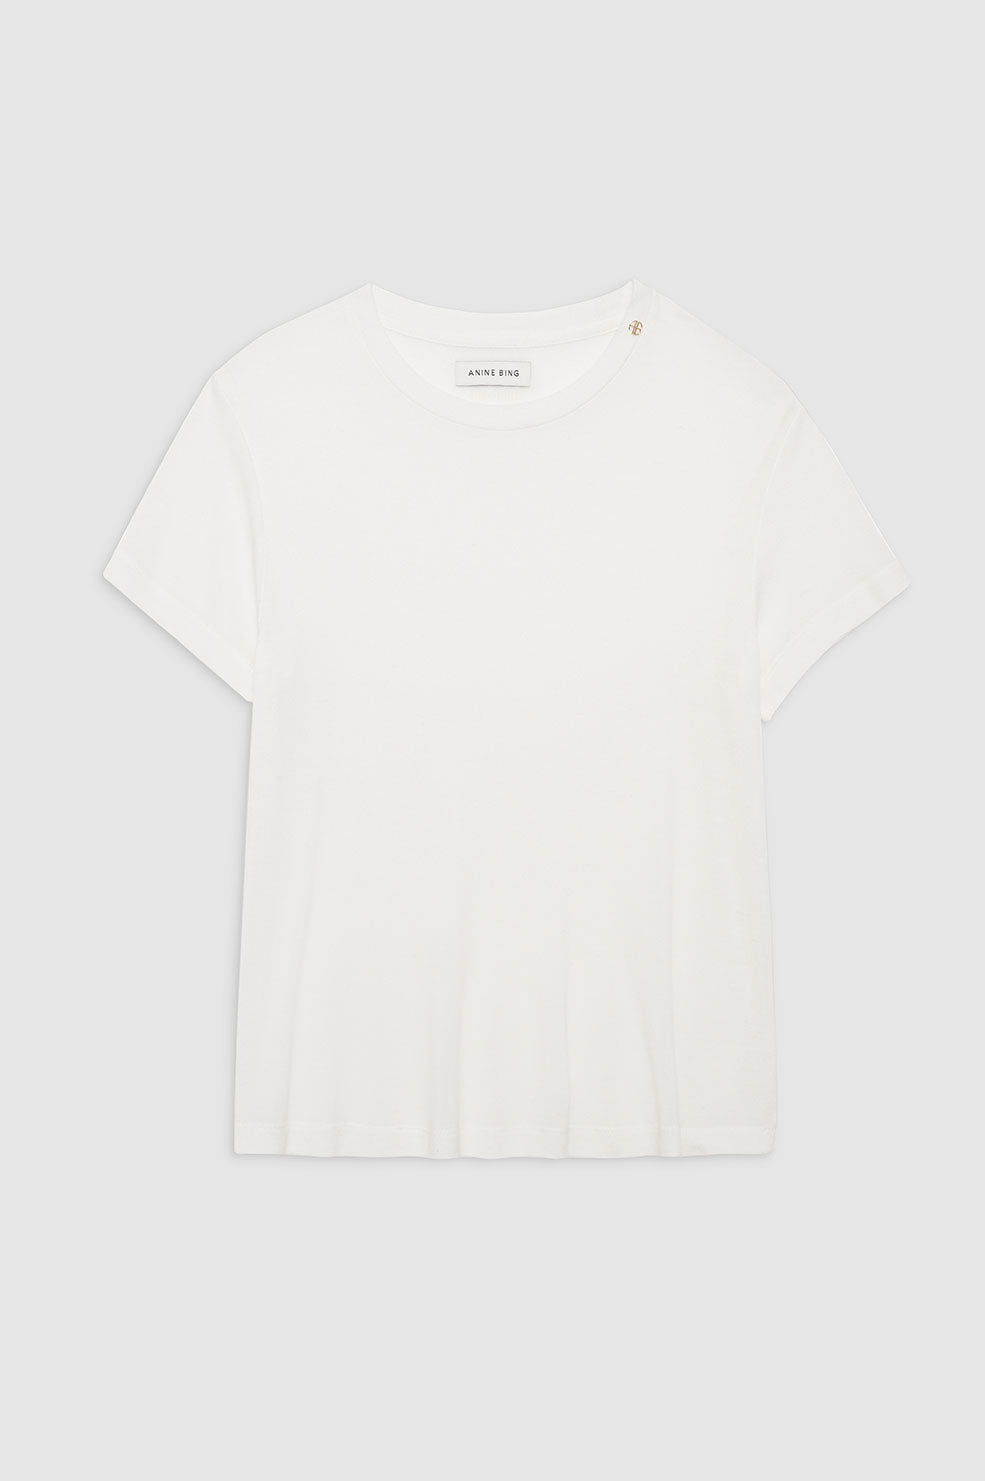 ANINE BING Amani Tee - Off White - Front View